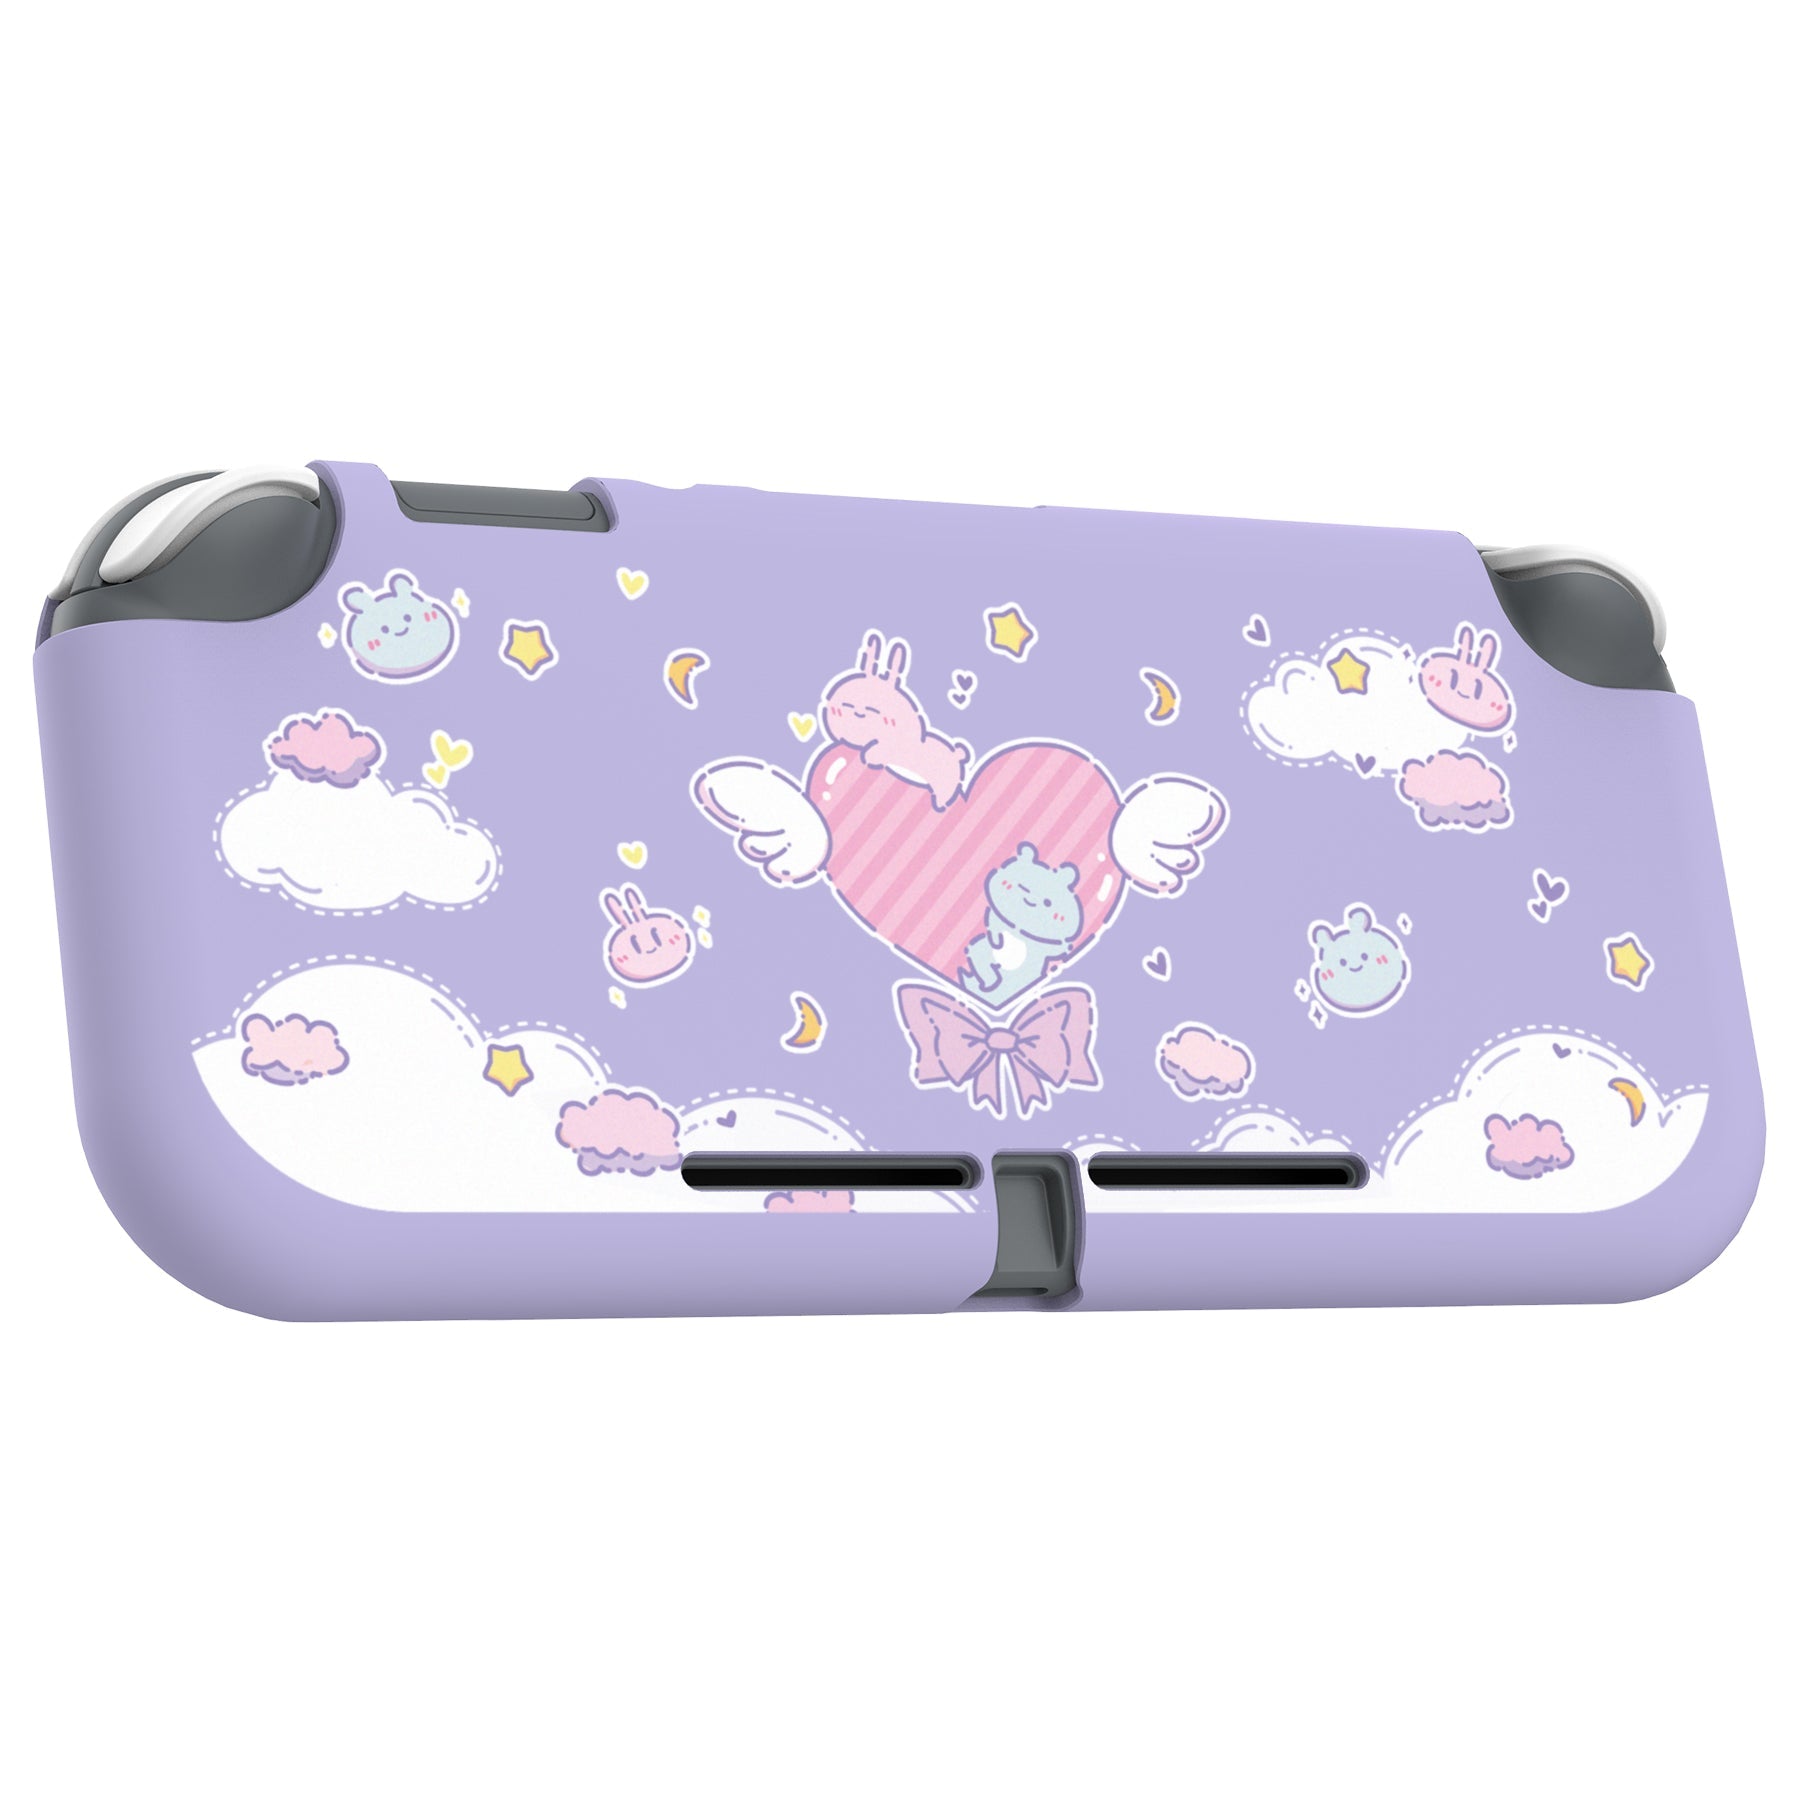 Are You Am I - Custom lighter case 🦋 now with butterflies